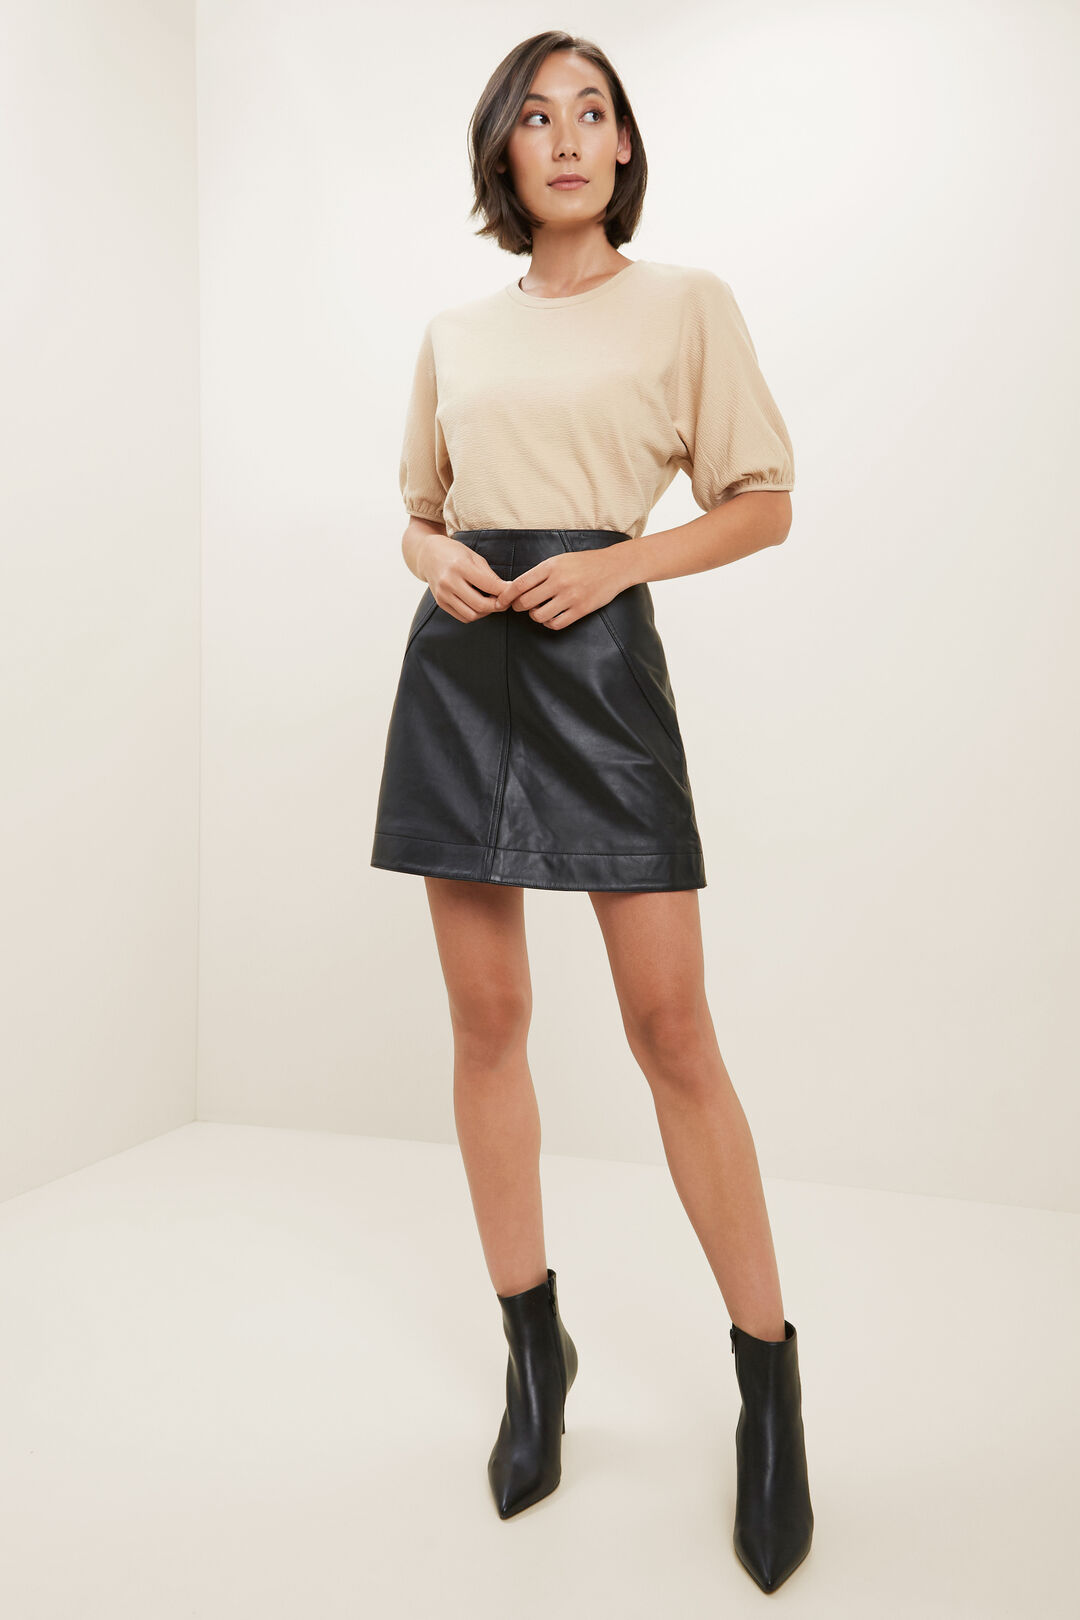 Crepe Jersey Top | Seed Heritage